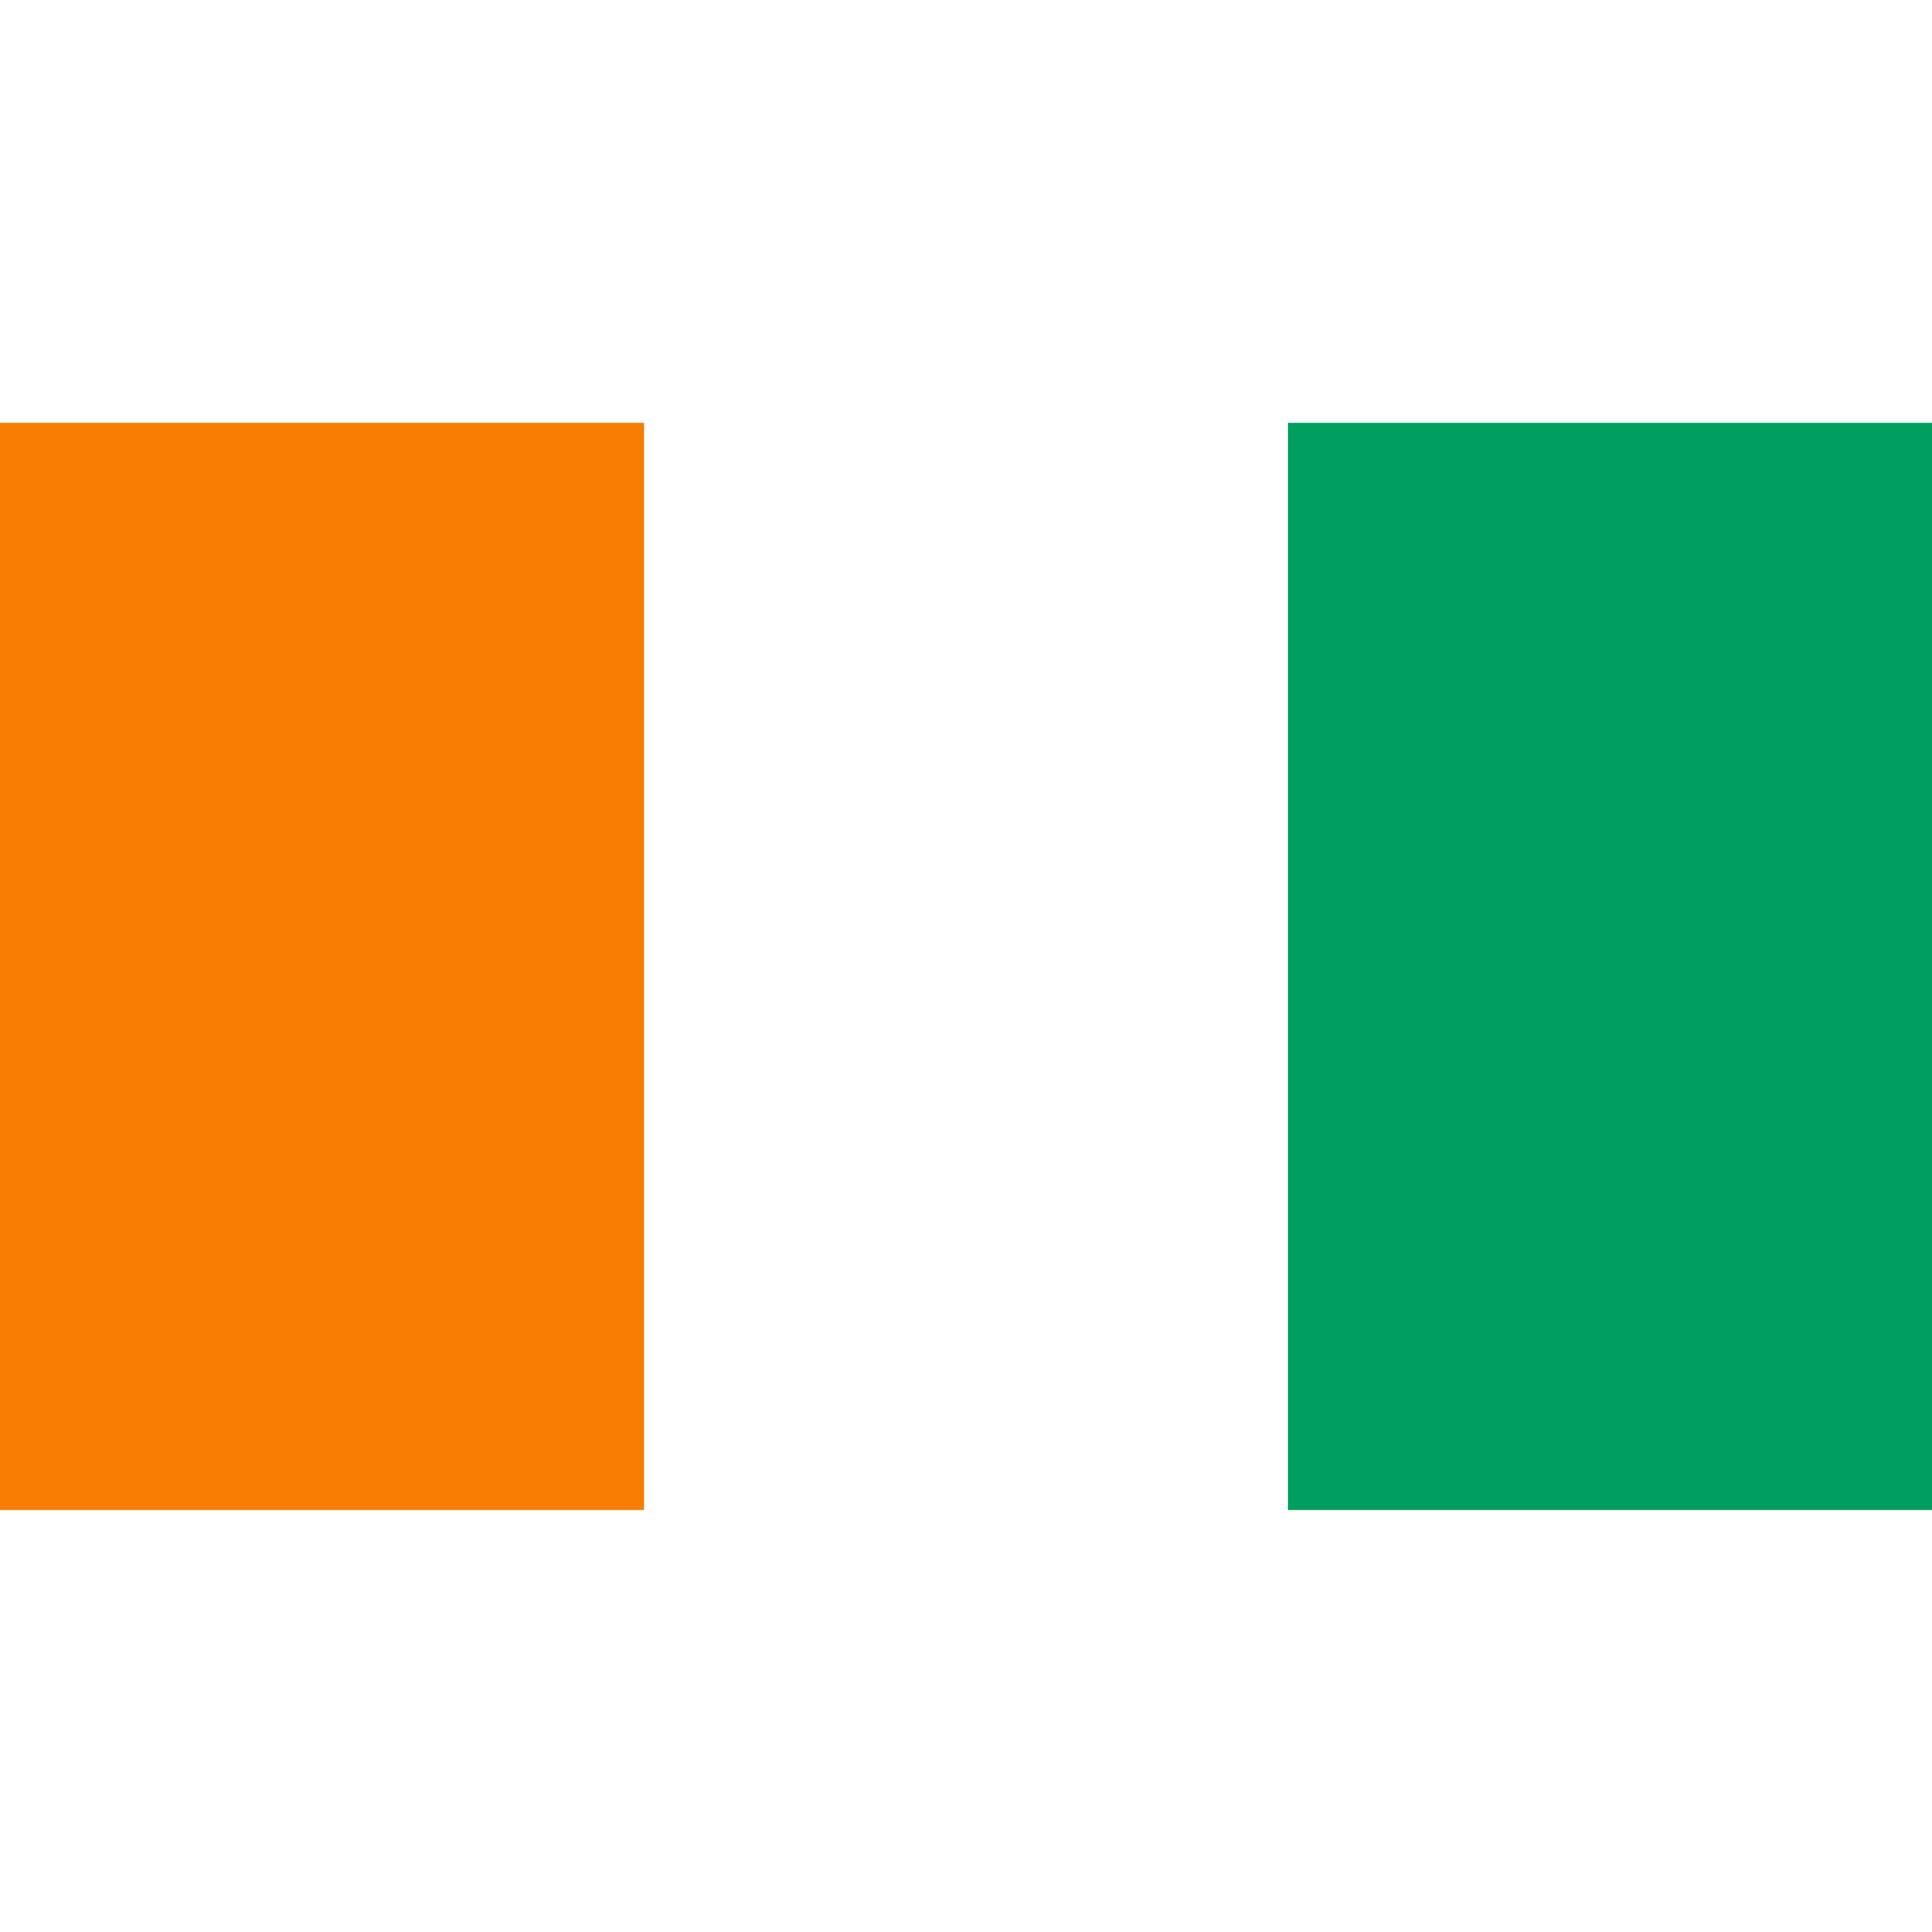 The flag of Côte d'Ivoir has 3 equal vertical bands in orange, white and green. 